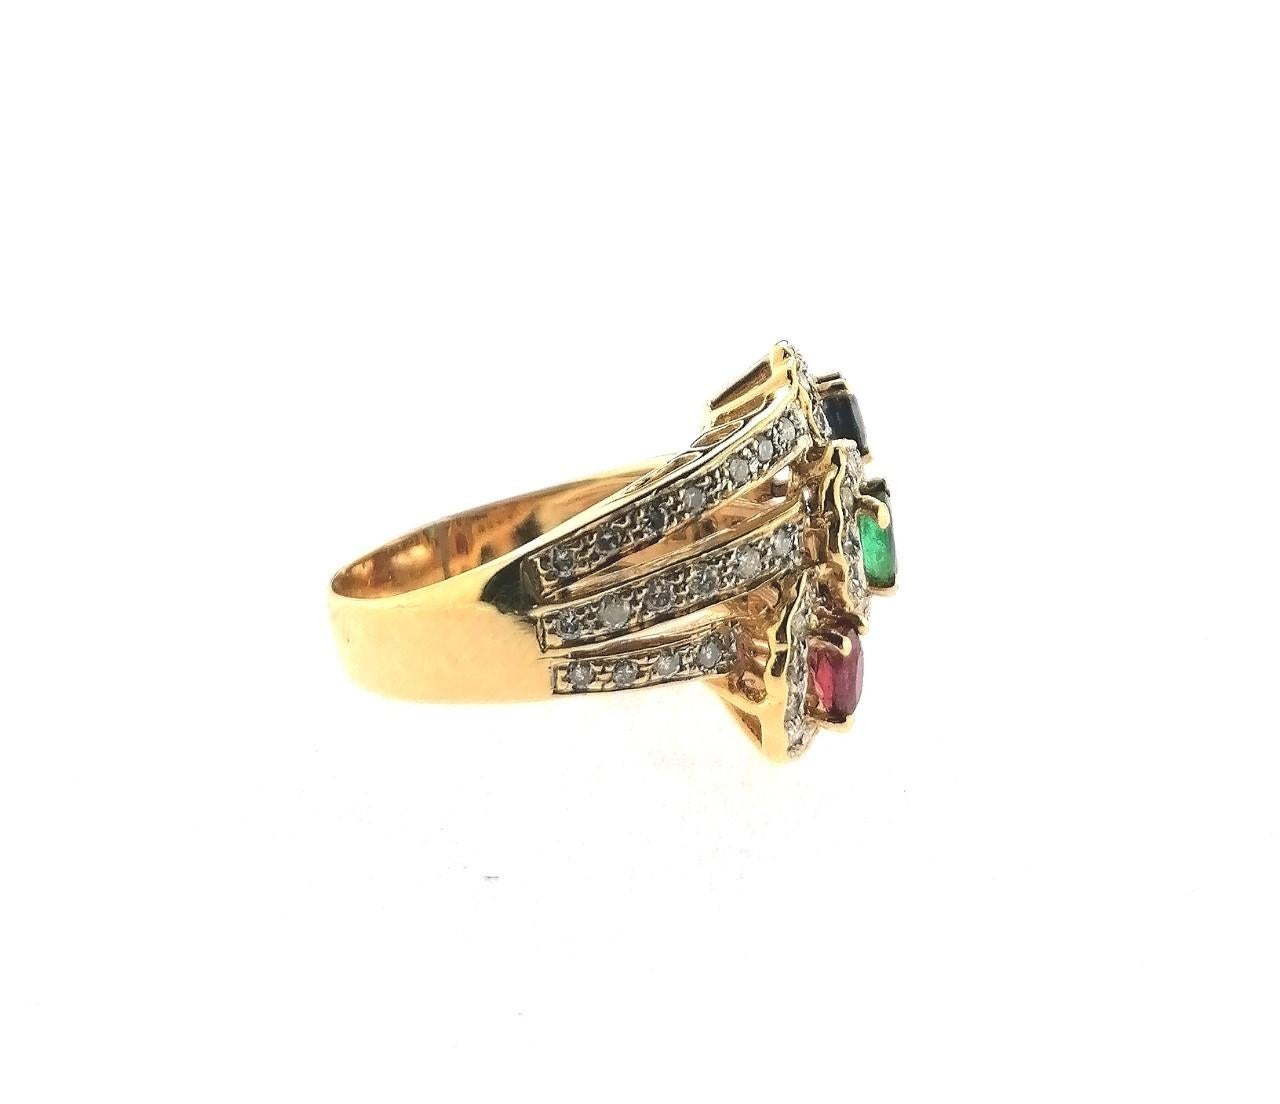 A 18 karat yellow gold ring with three oval colored stones of 0.25 carats each one:
A sapphire, an emerald and a ruby. Brilliant-cut diamonds totaling 1.00 carat in weight are set around the colored stones. It is a very elegant wide ring with a very